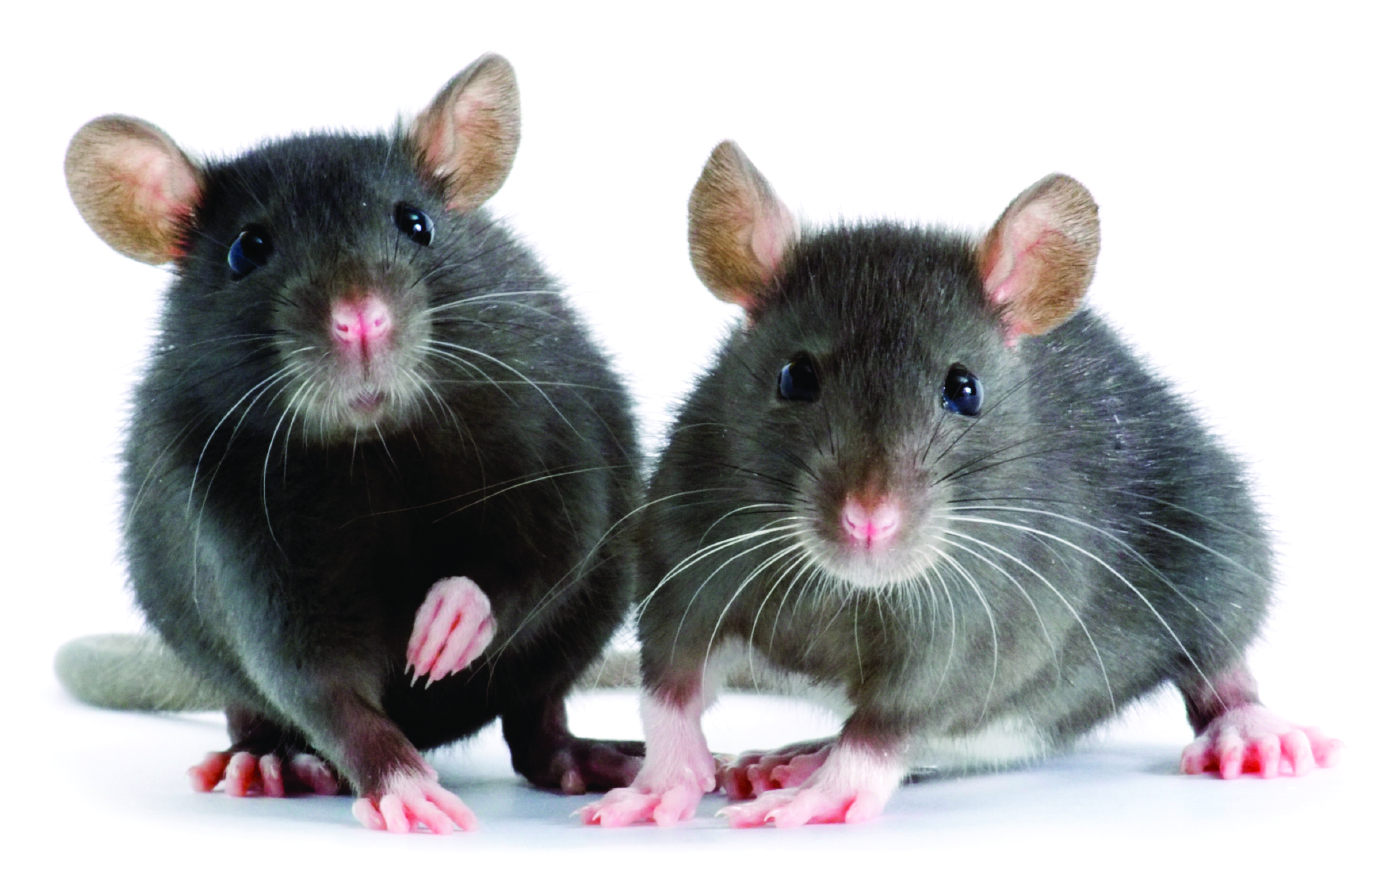 4 Diseases Caused by Rodent Droppings